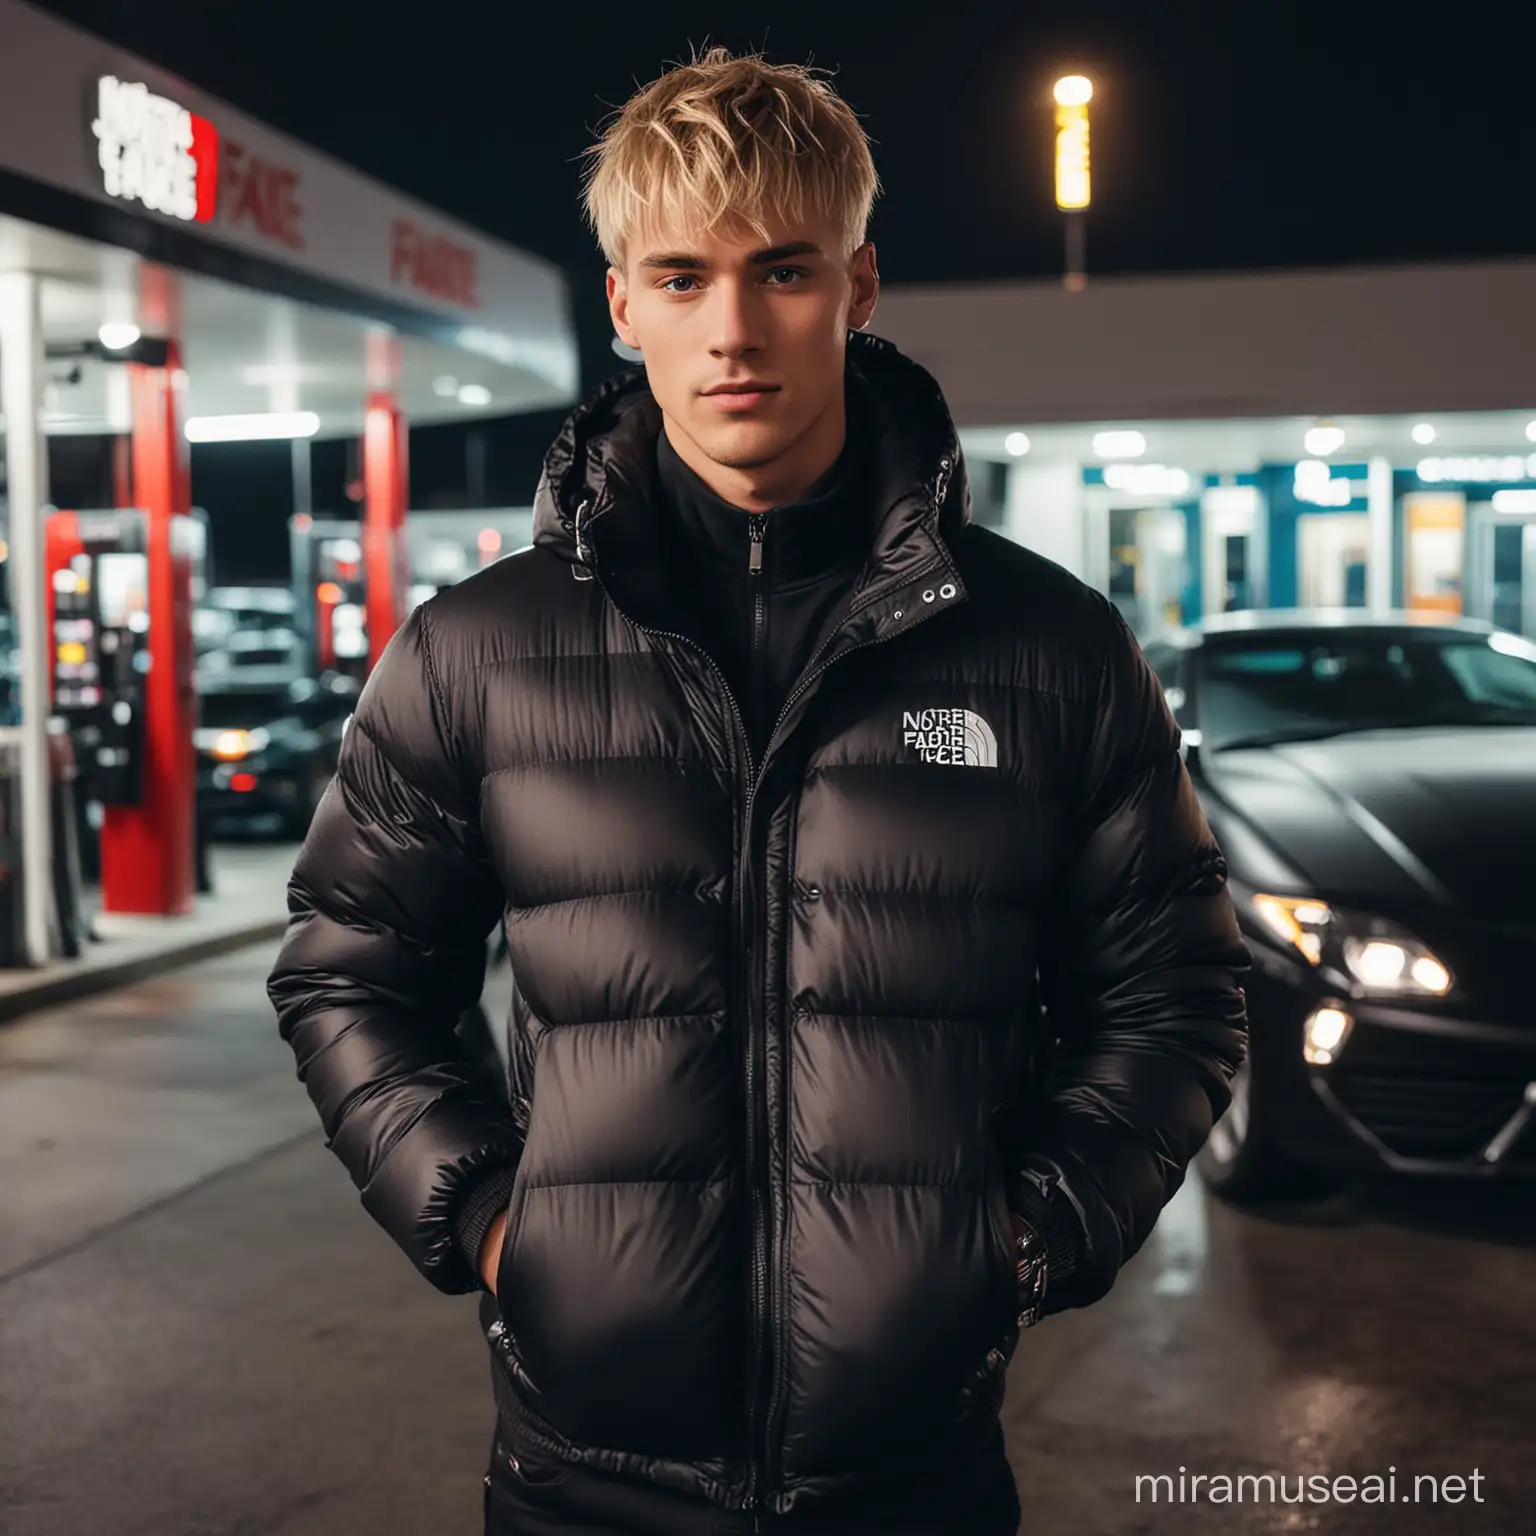 Stylish Blond Man in North Face Jacket with Ice Chain and Lamborghini at Night